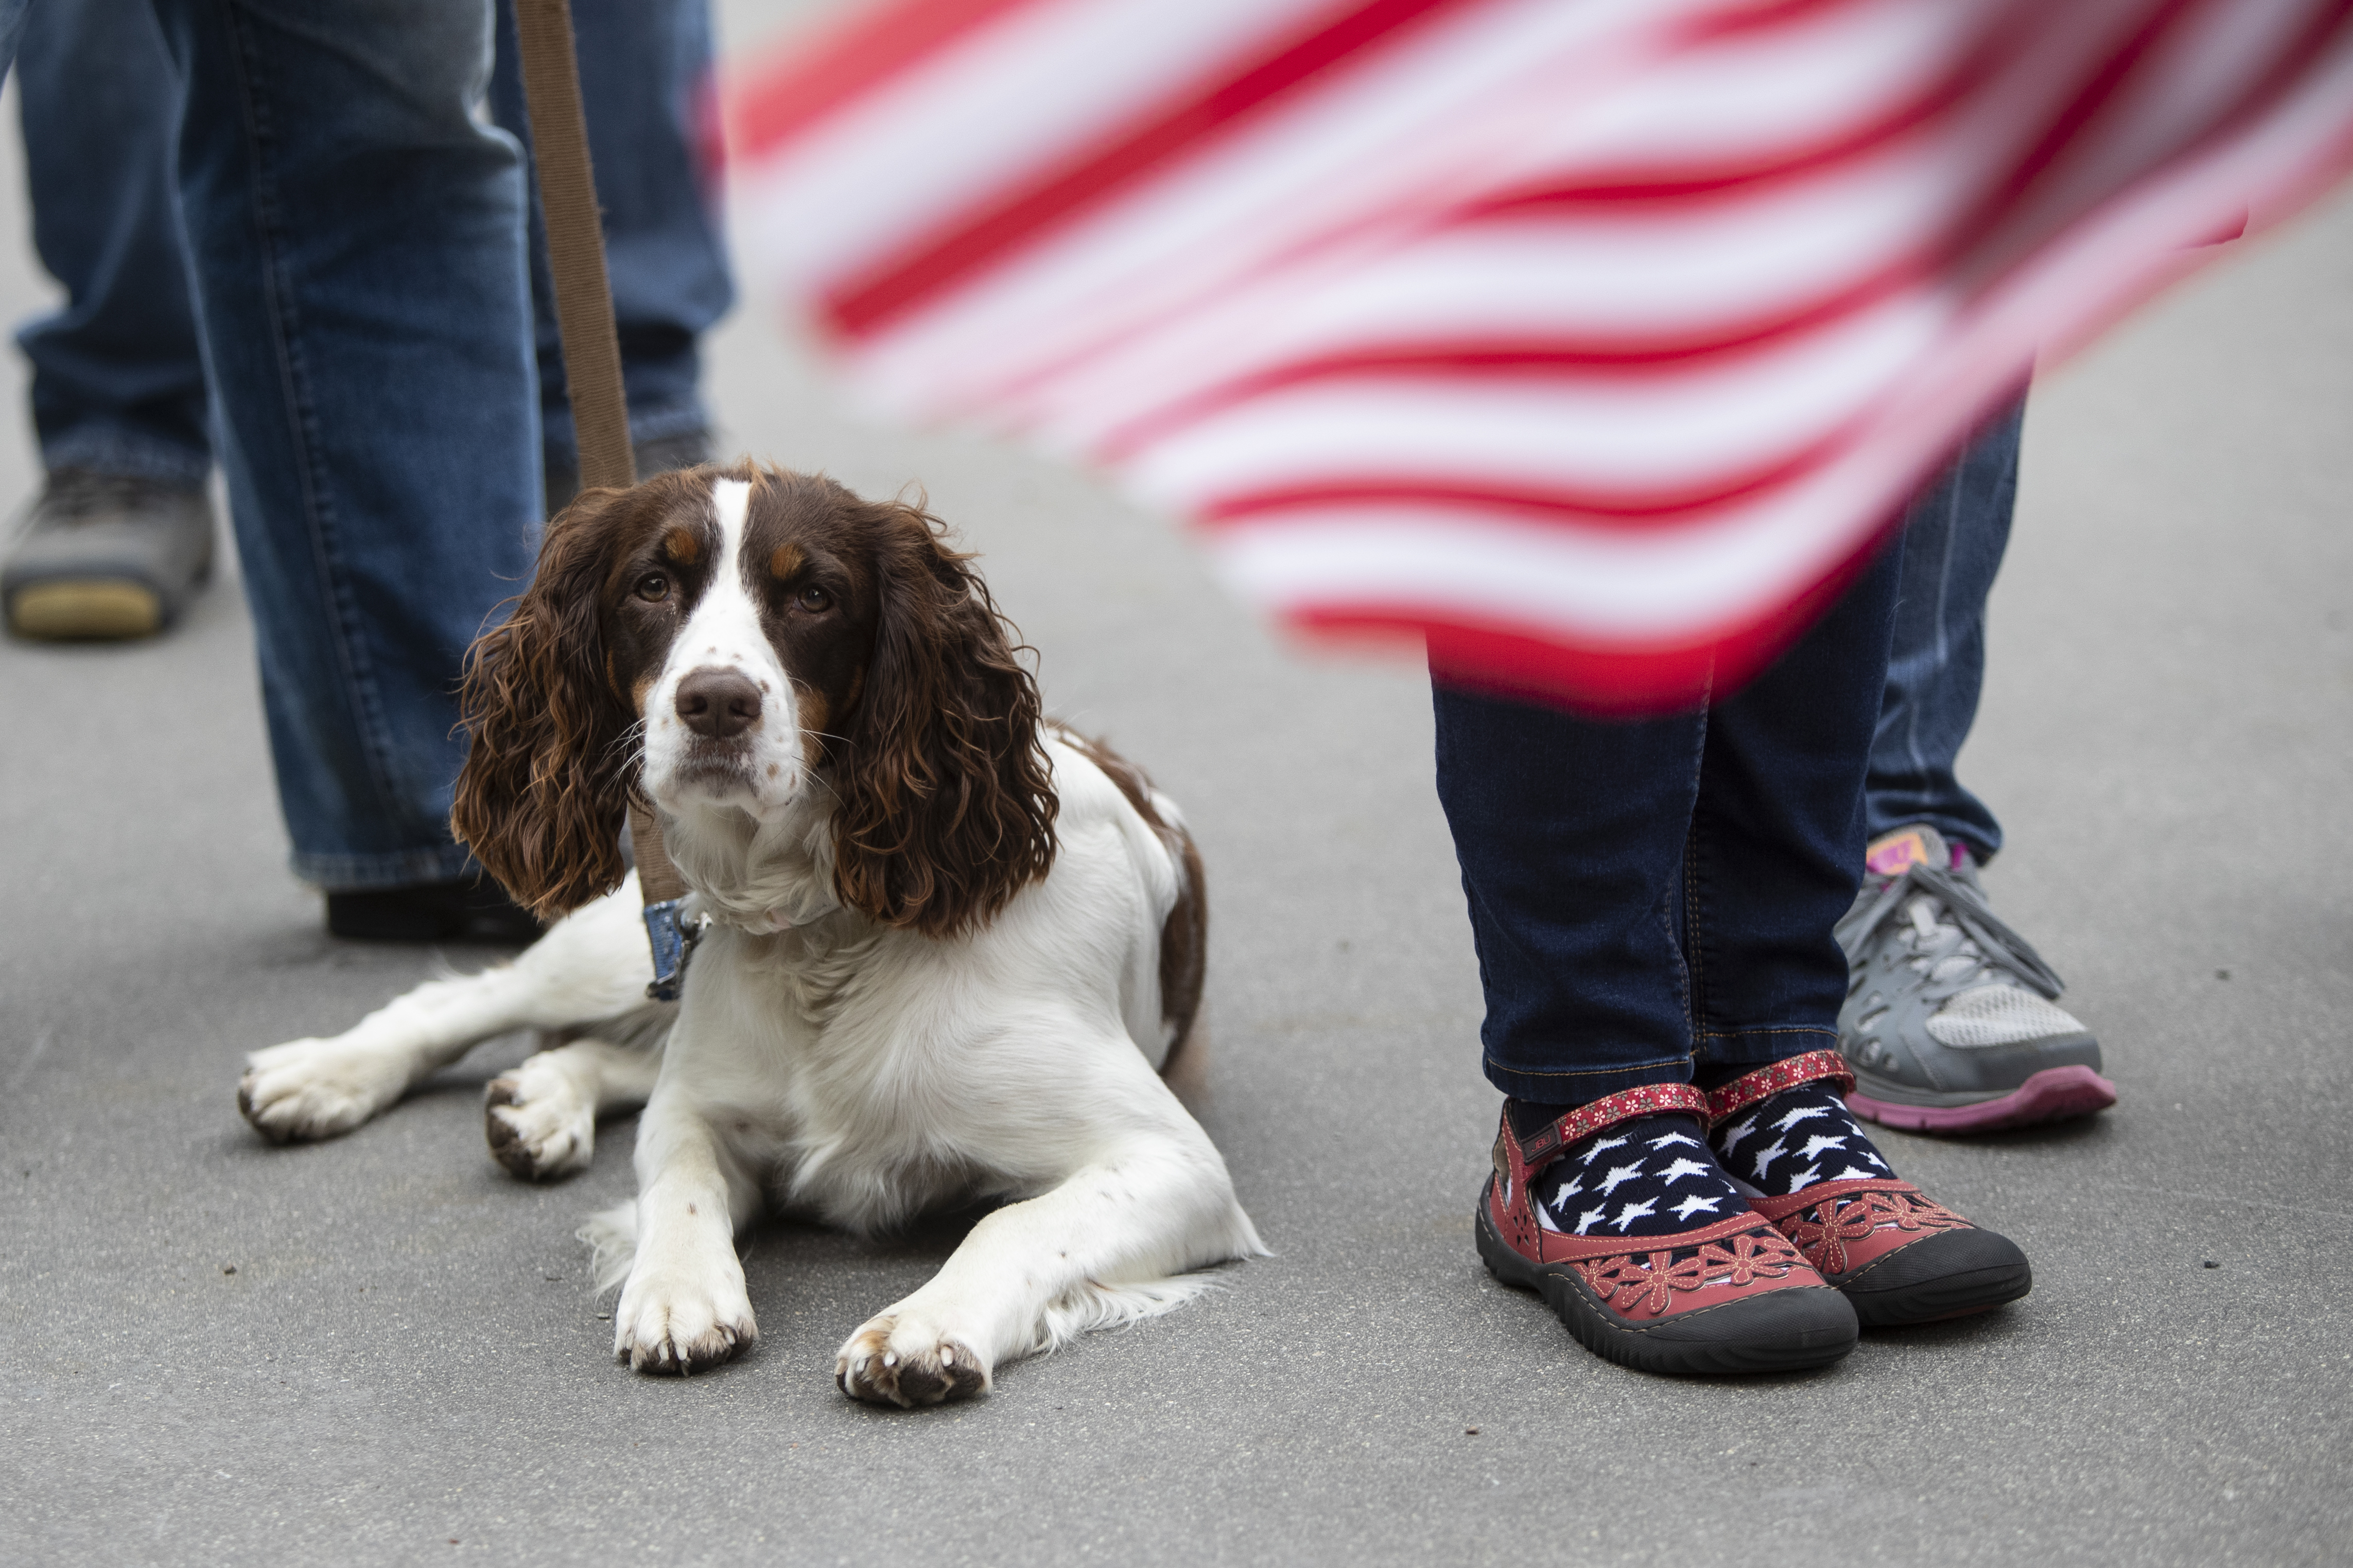 John Strauss' dog Valentine watches during the "American Patriot Rally-Sheriffs speak out" event at Rosa Parks Circle in downtown Grand Rapids on Monday, May 18, 2020. The crowd is protesting against Gov. Gretchen Whitmer's stay-at-home order. Strauss, who is from Rockford, said his dog was born on Valentine's Day a couple of years ago. (Cory Morse | MLive.com)